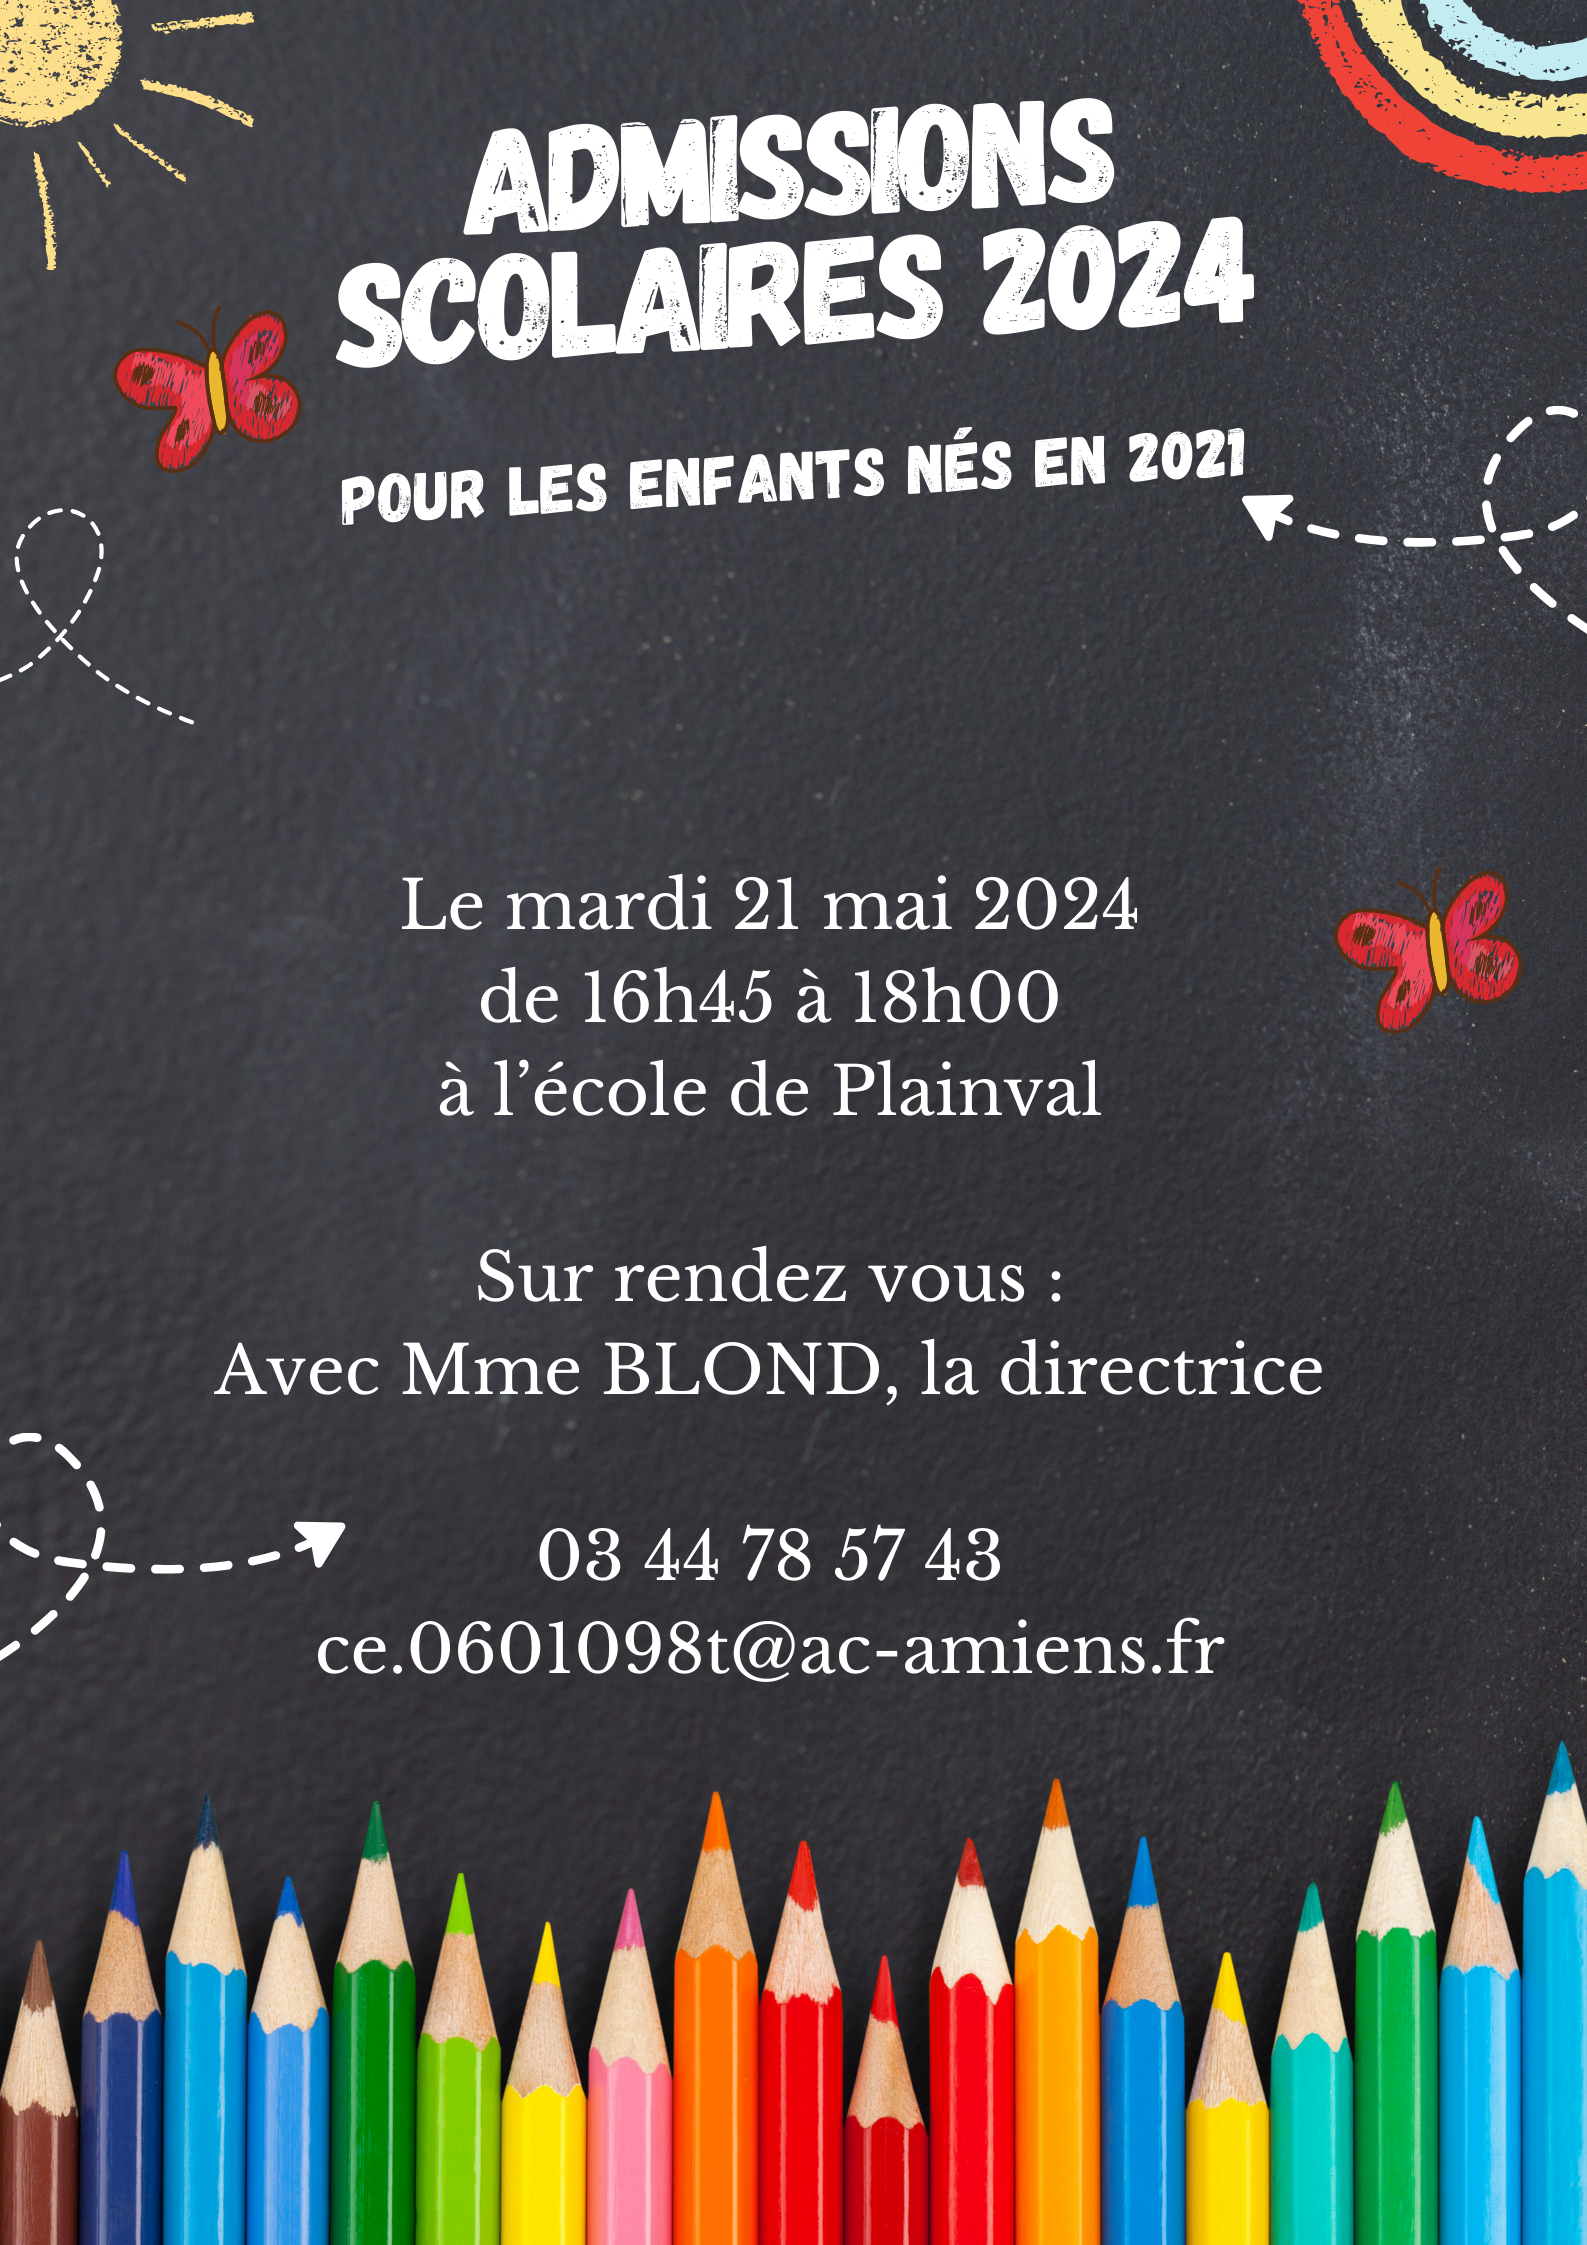 Admissions scolaires 2024.png